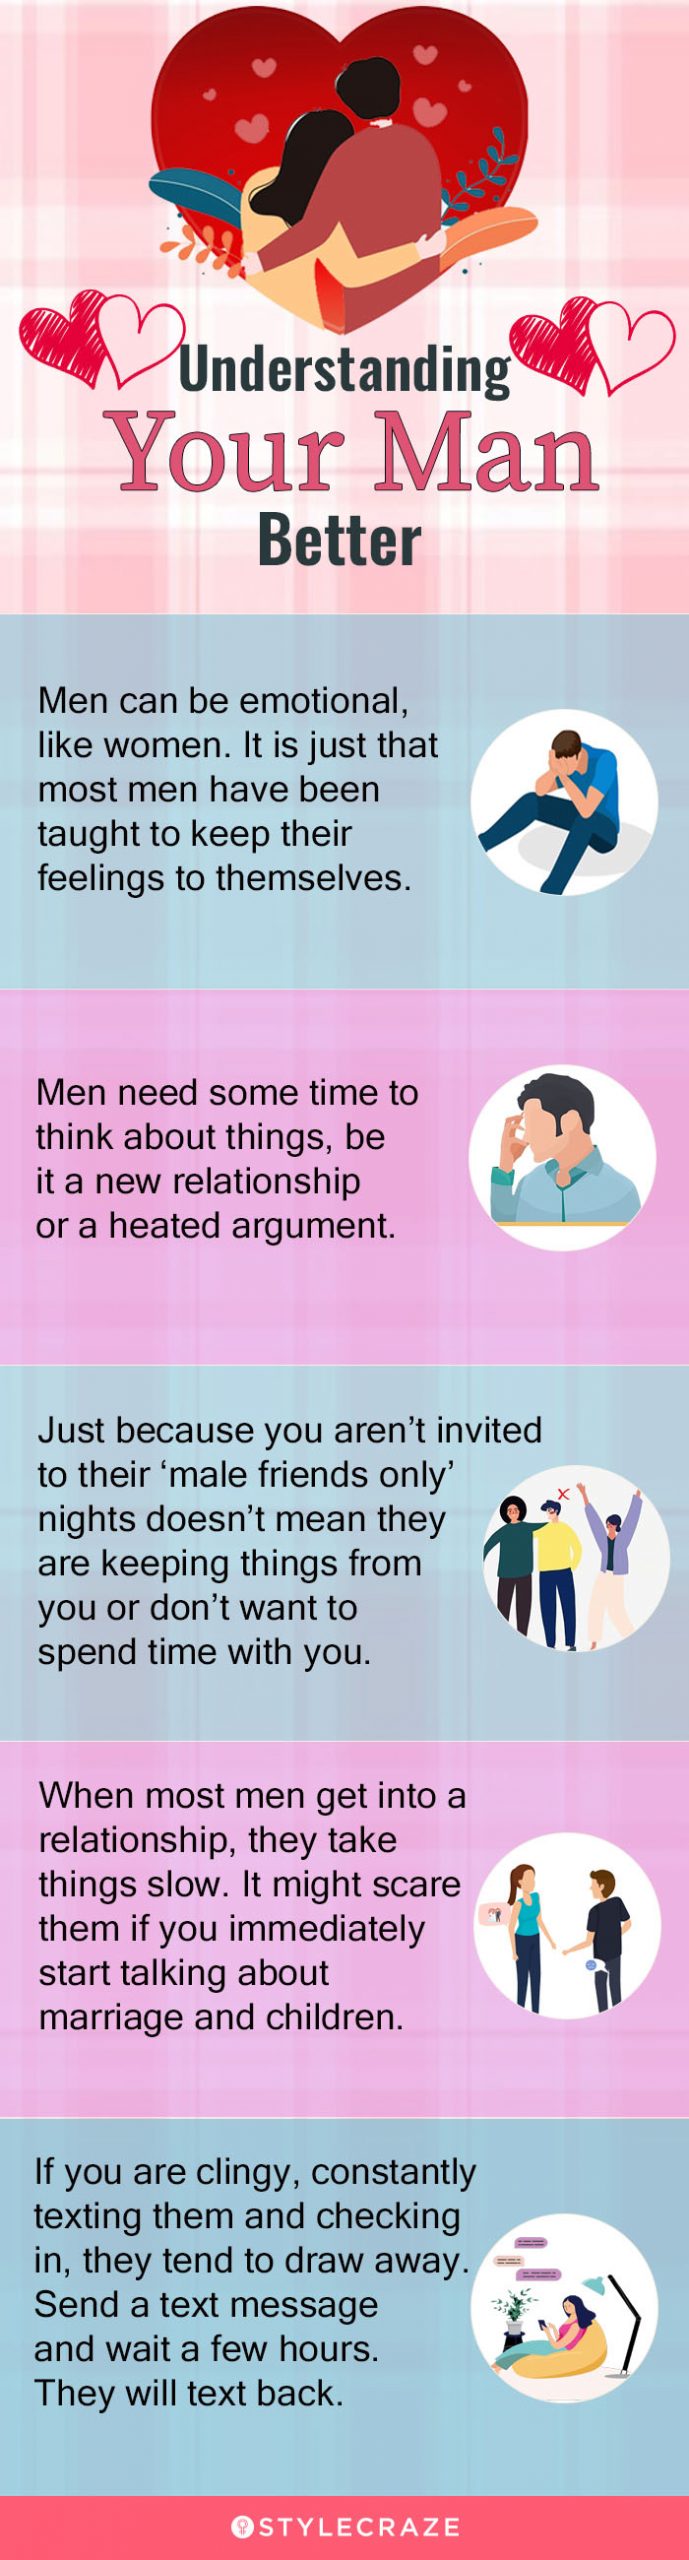 understand your man better (infographic)